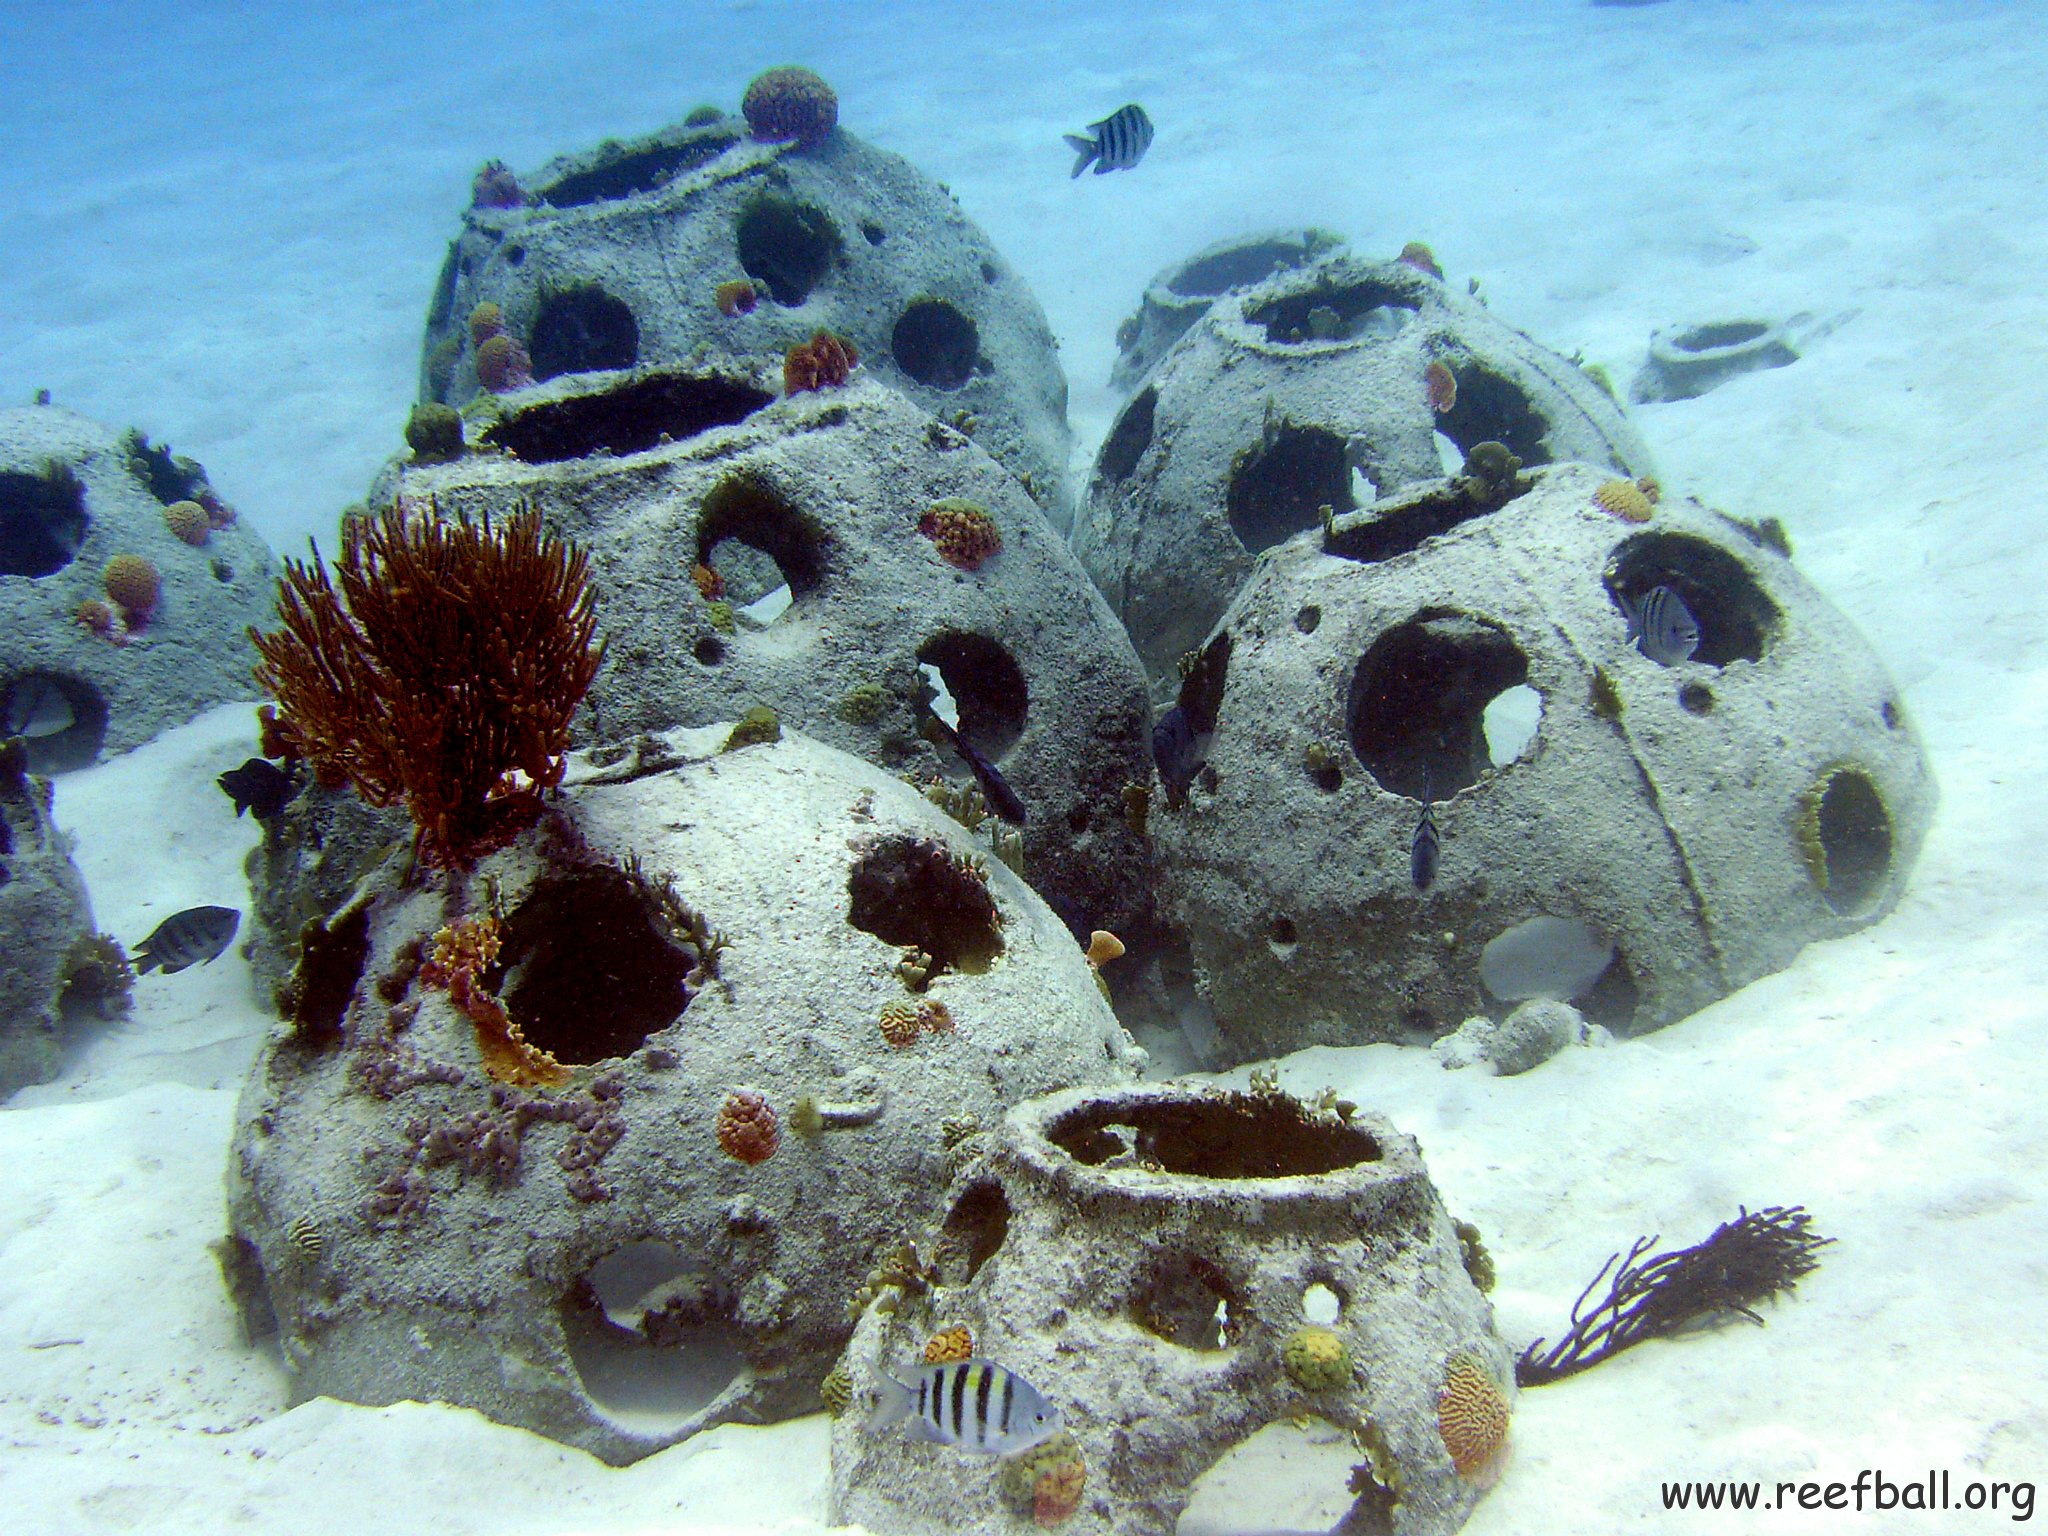 Reefball colony (see reefball.org)